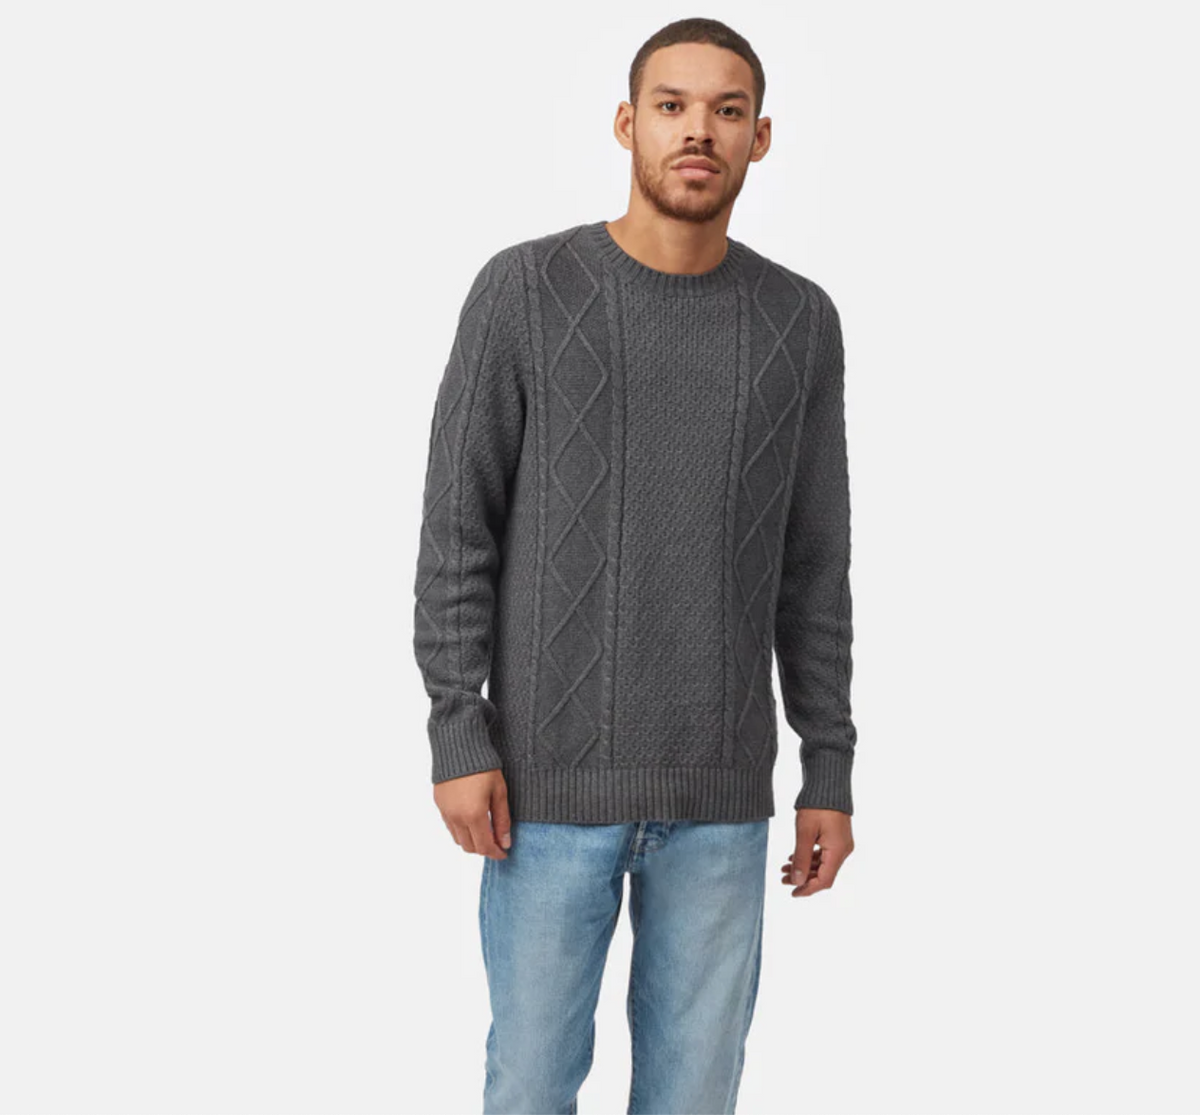 TenTree Men's Highline Cable Crew